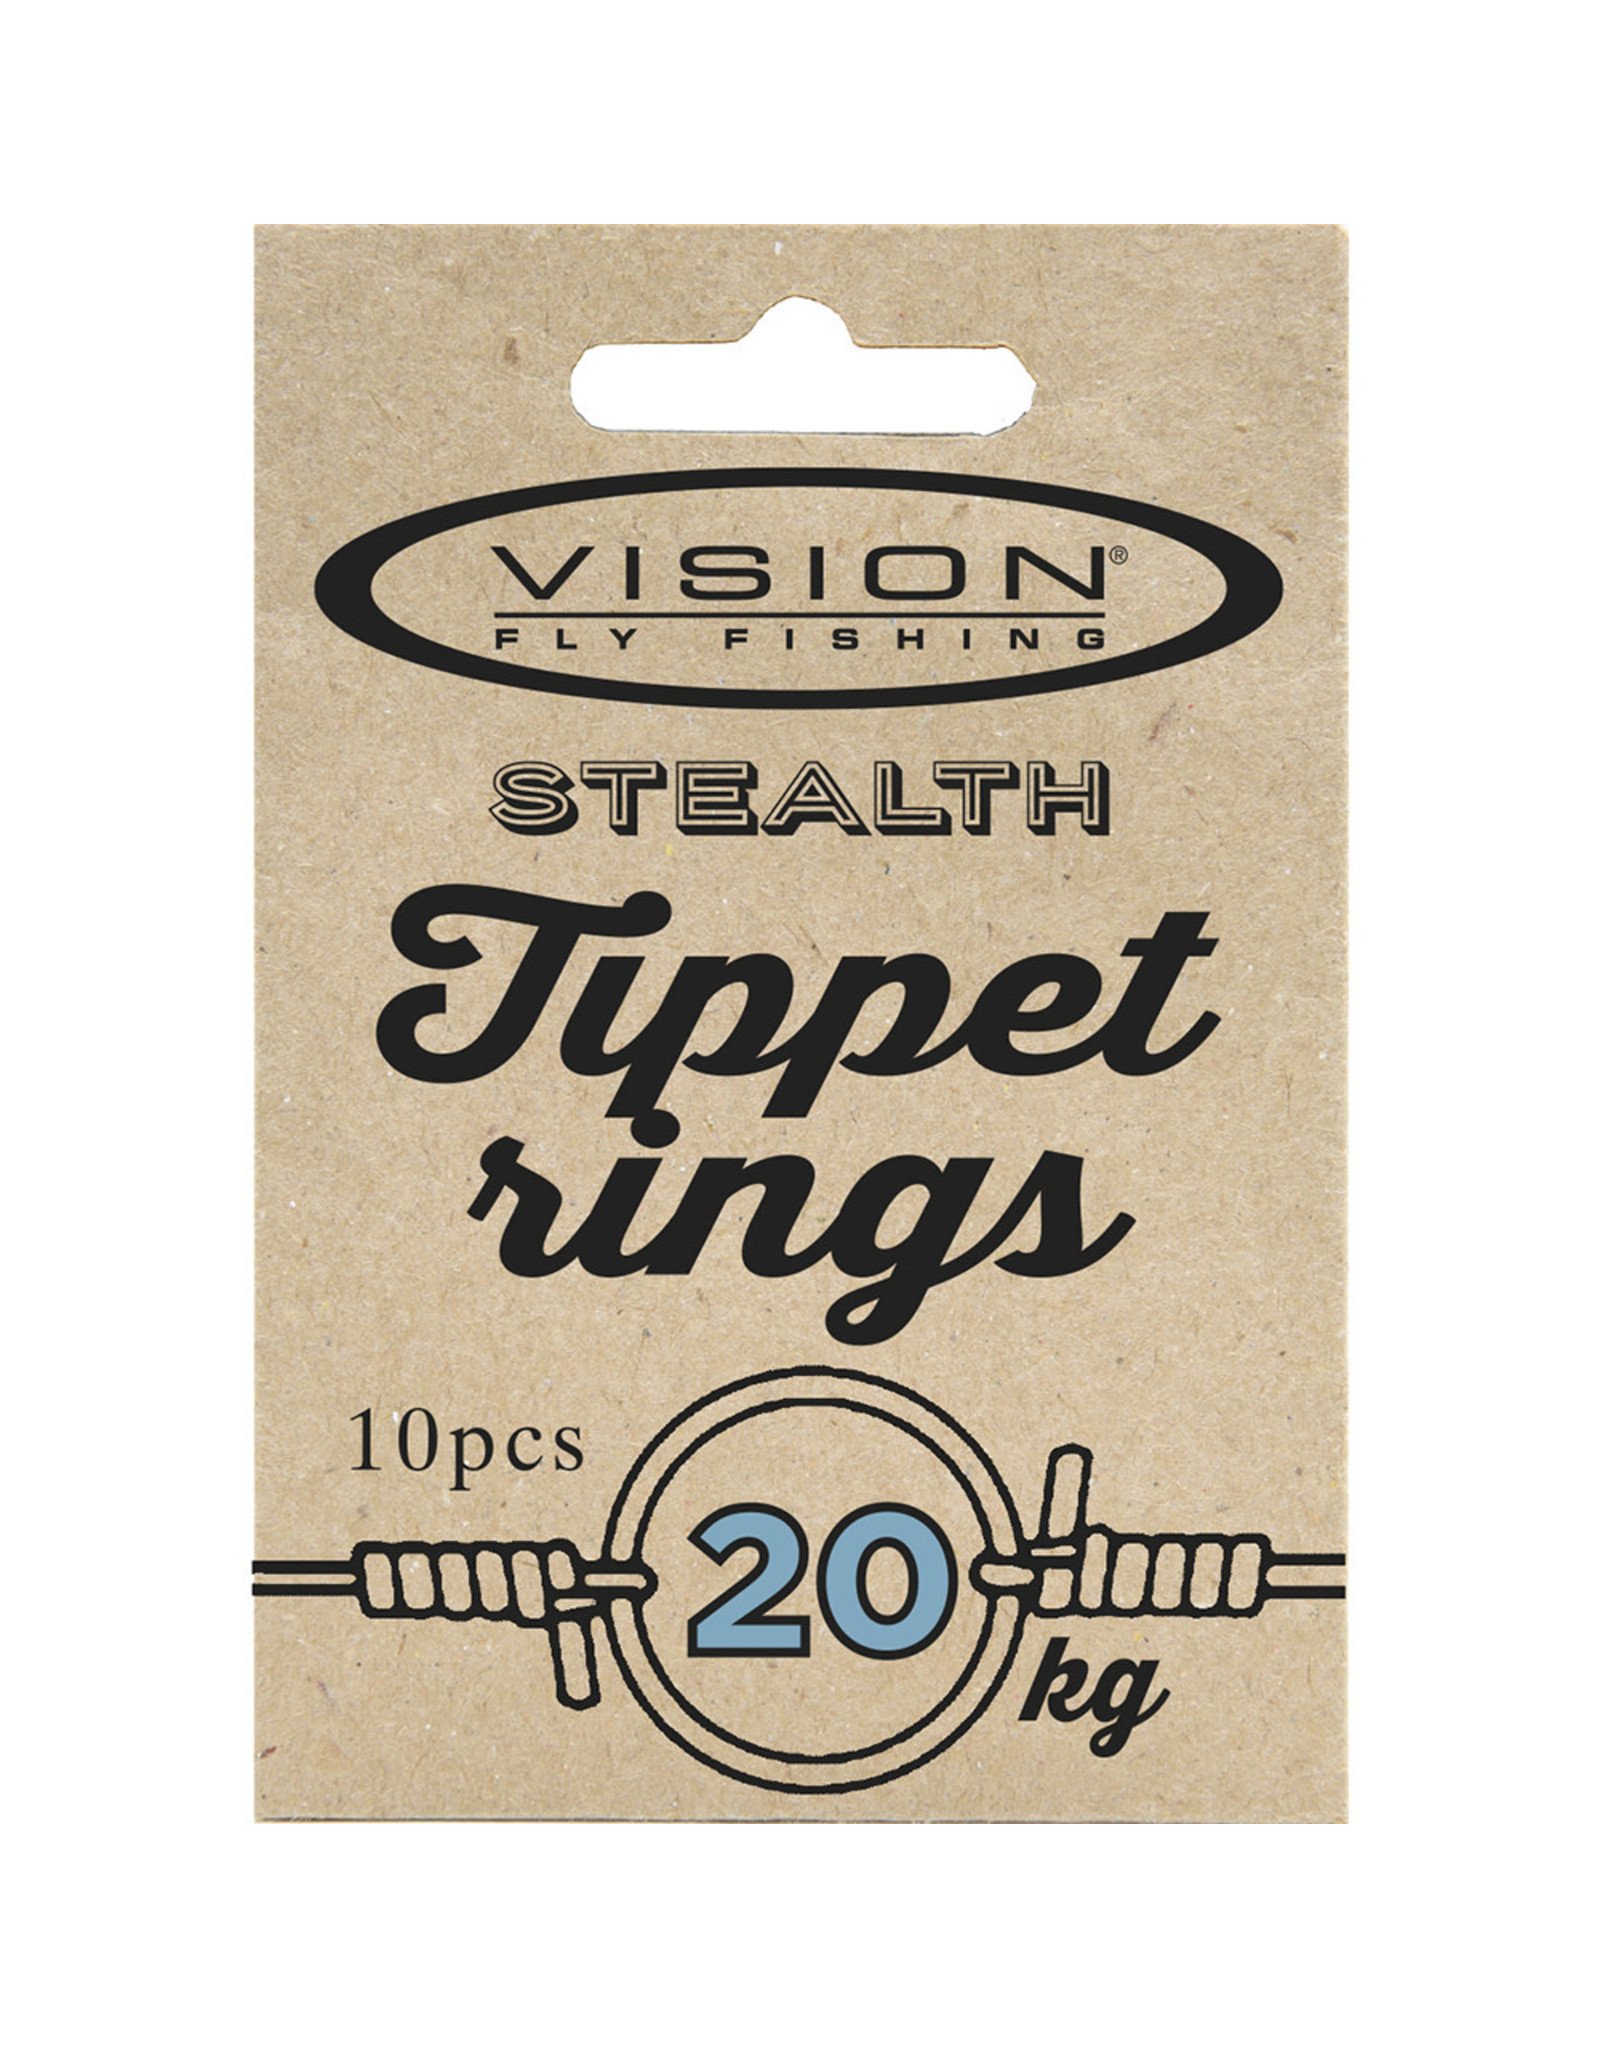 VISION FLY FISHING Tippet Rings